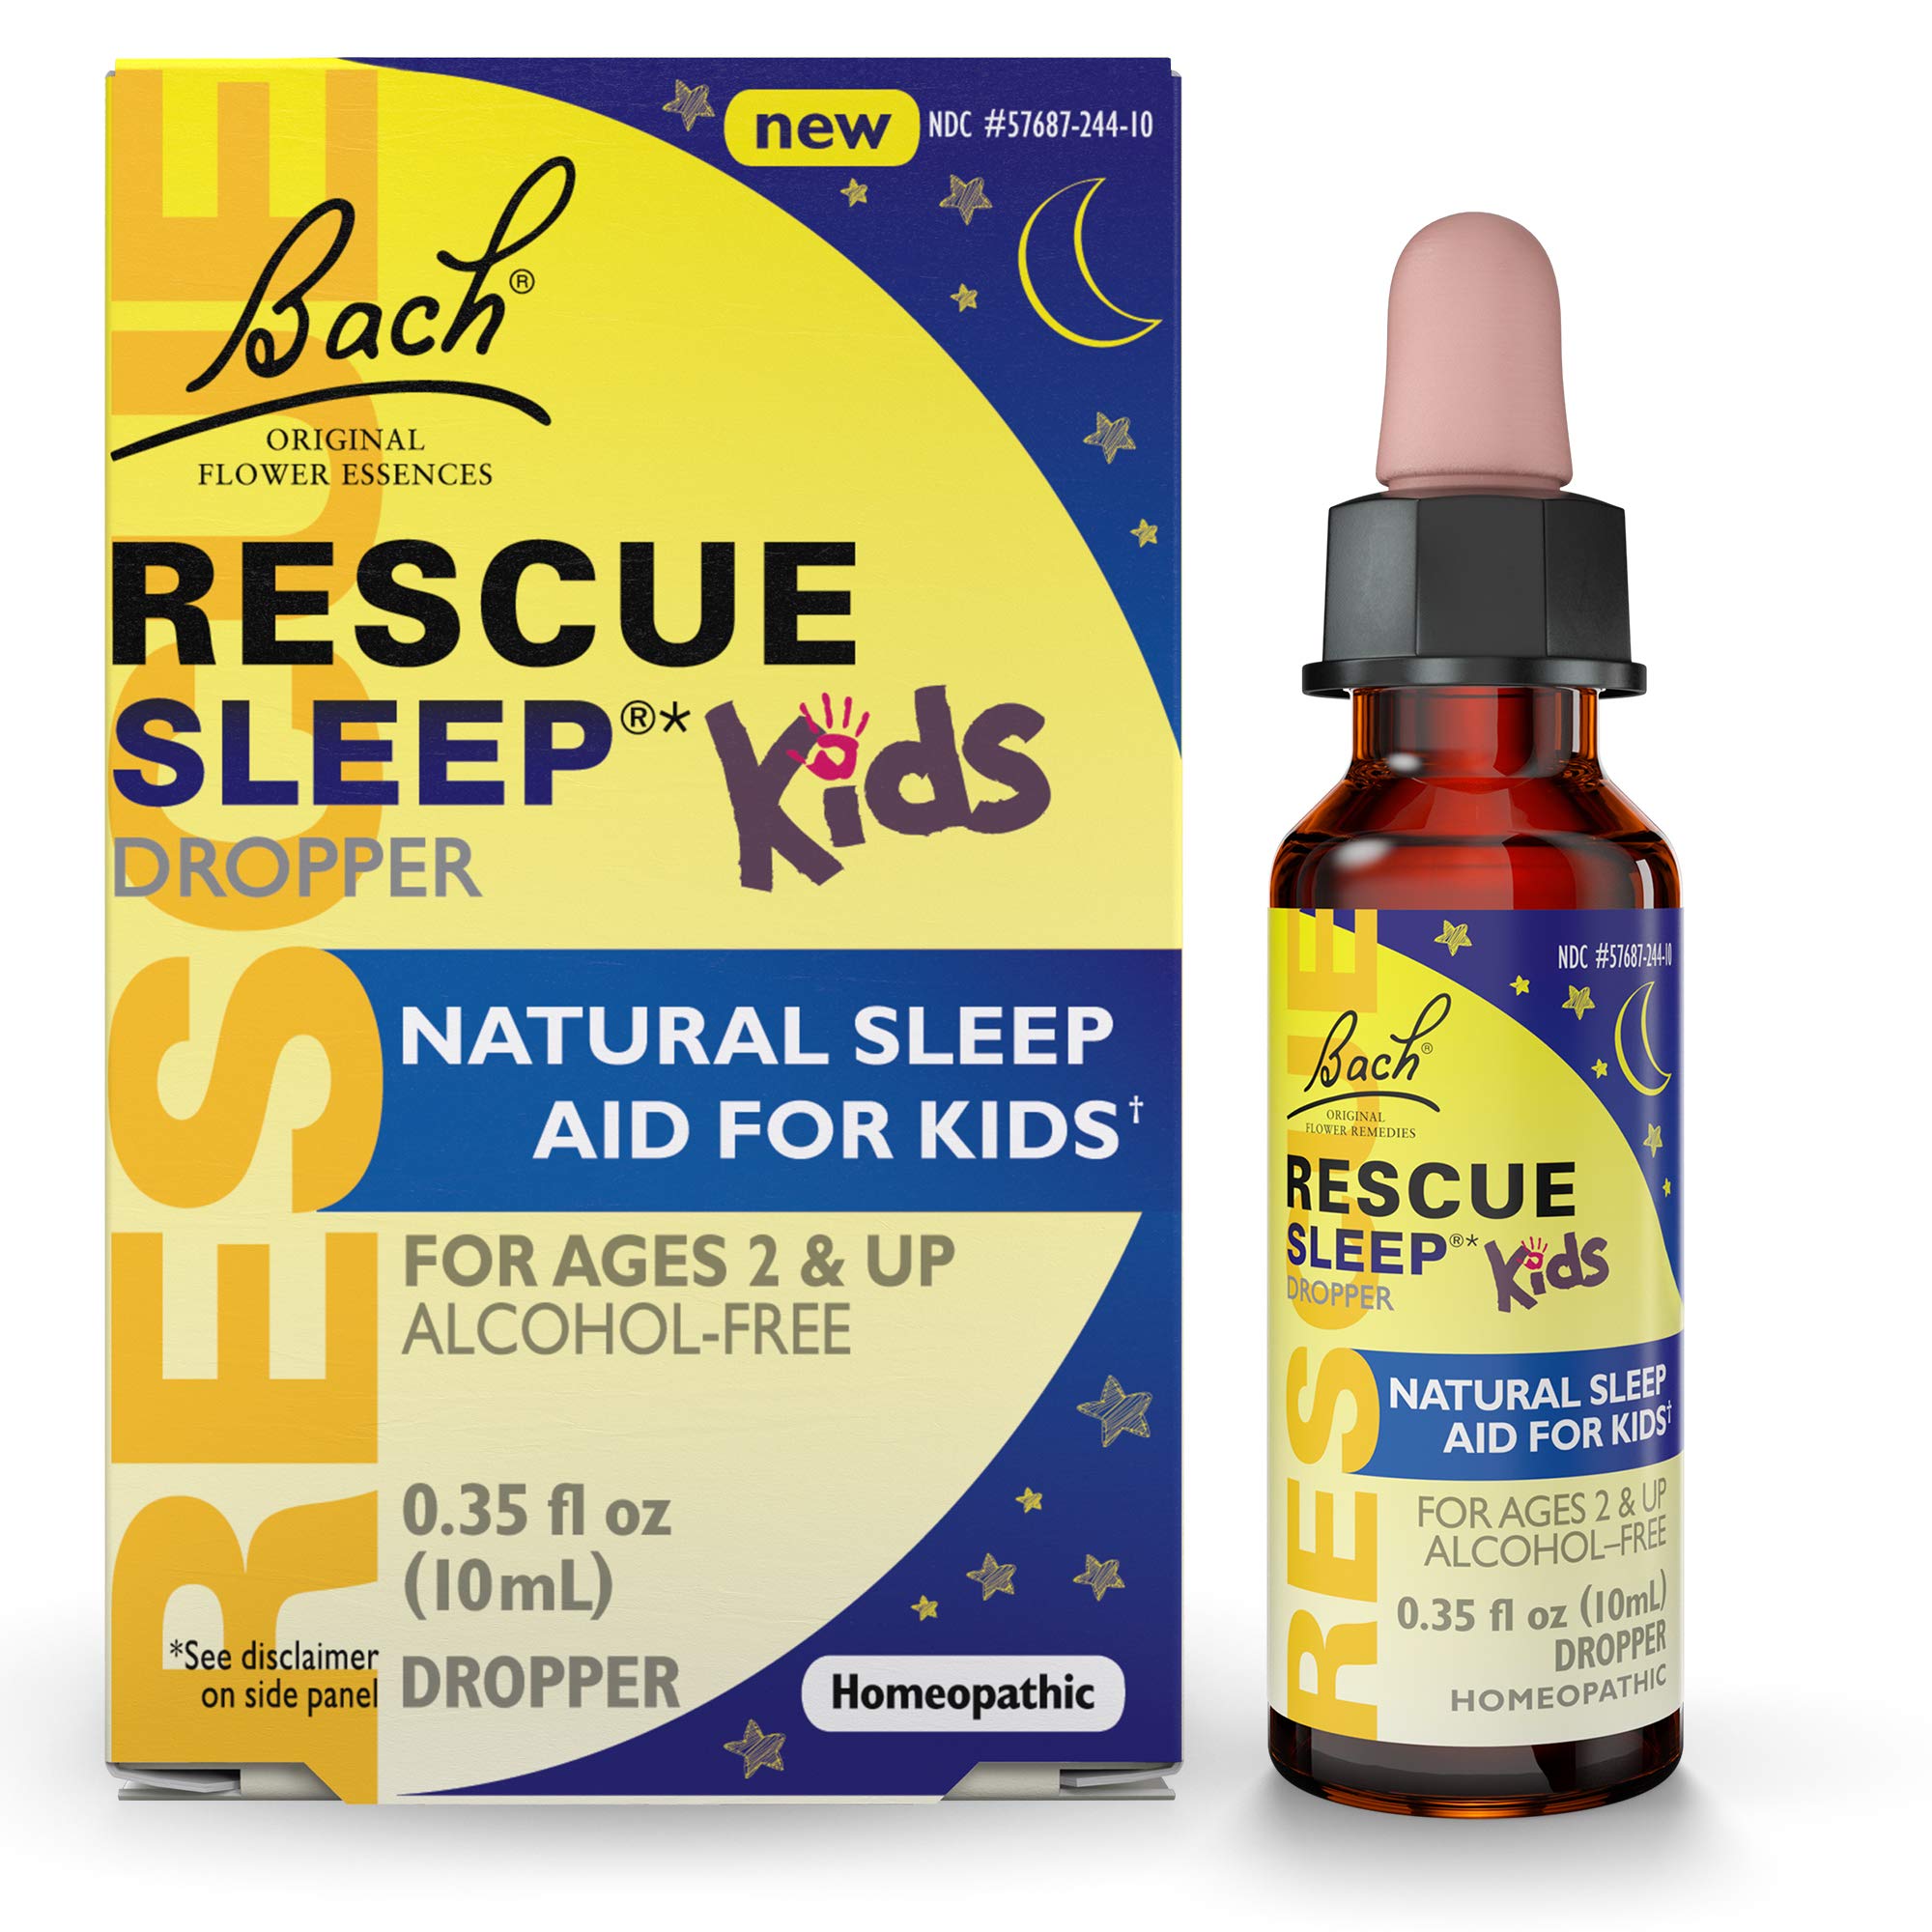  Bach RESCUE REMEDY Dropper 20mL, Natural Stress Relief,  Homeopathic Flower Essence, Vegan, Gluten & Sugar-Free, Non-Habit Forming :  Health & Household